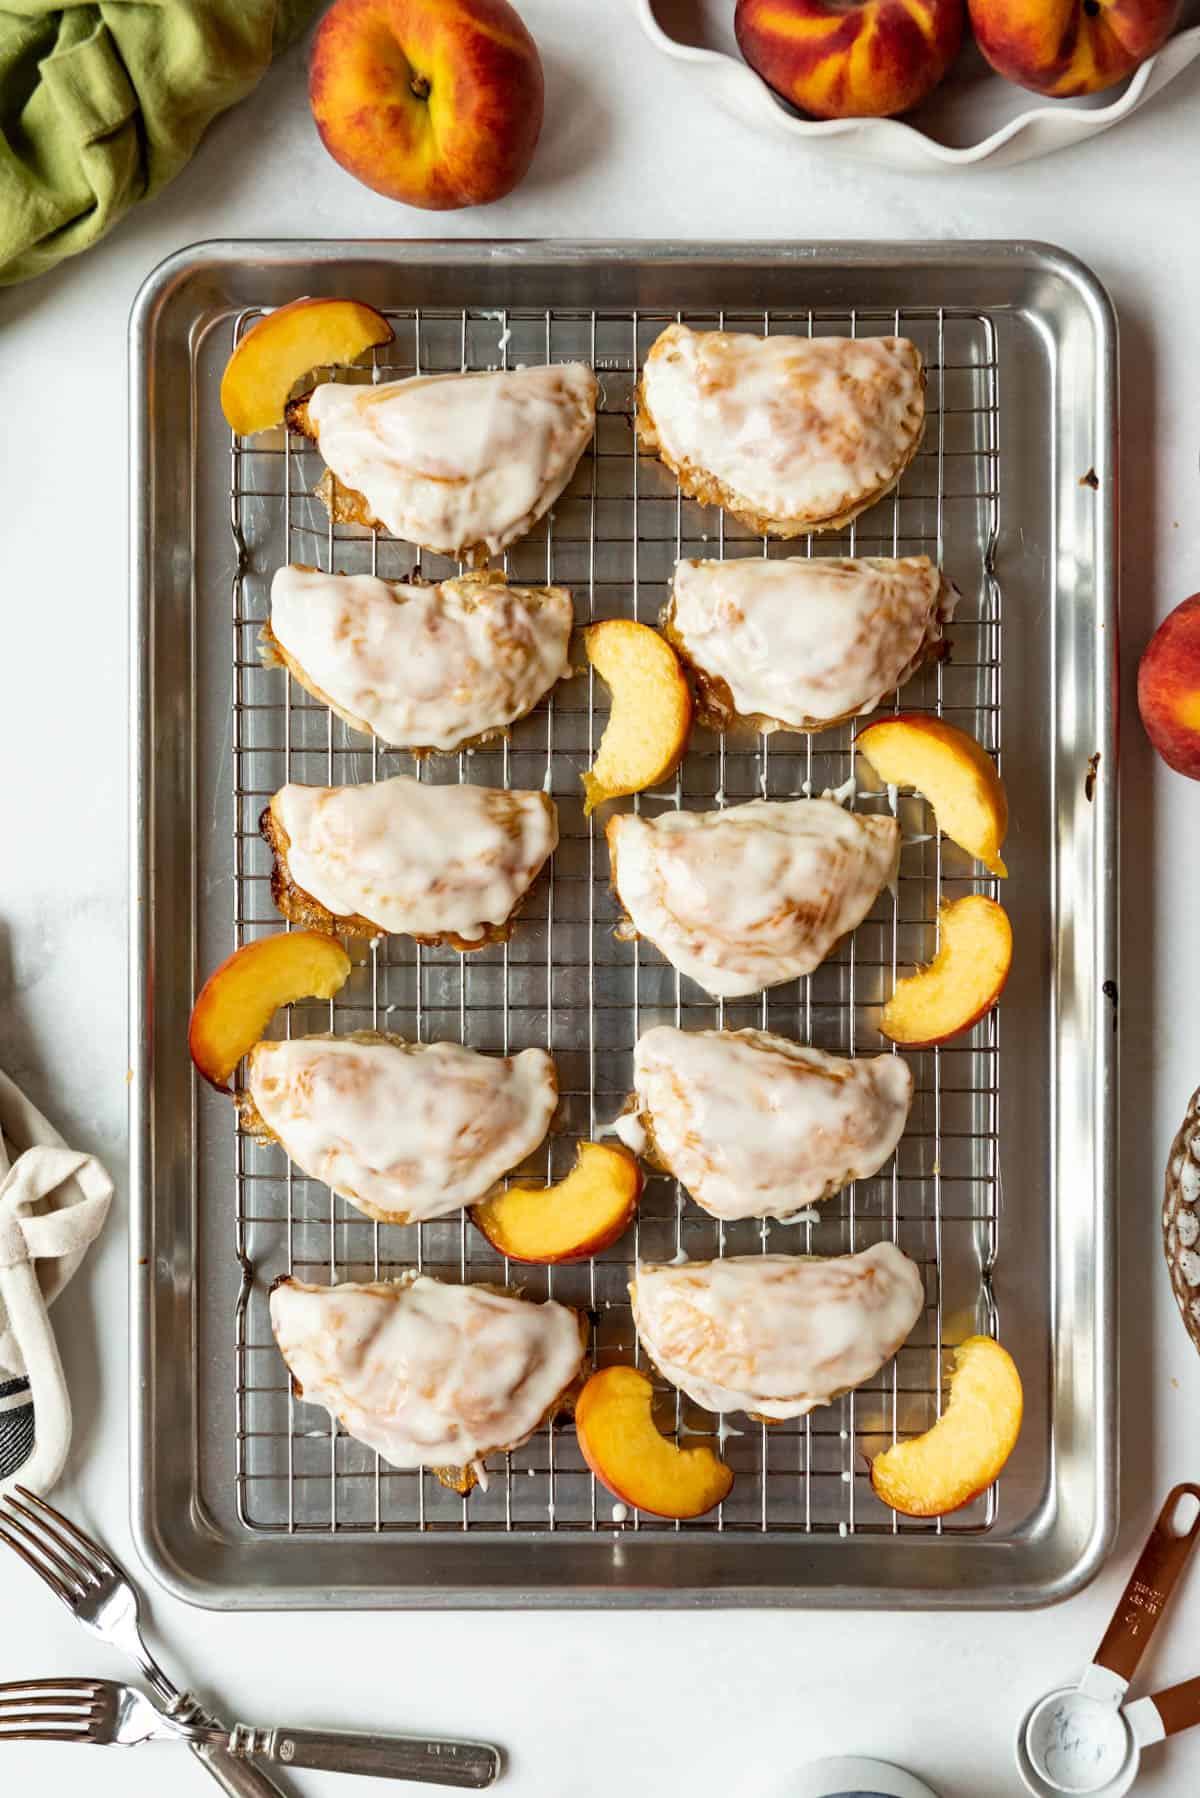 Baked and glazed peach hand pies on a baking sheet lines with a wire rack next to slices of fresh peaches.